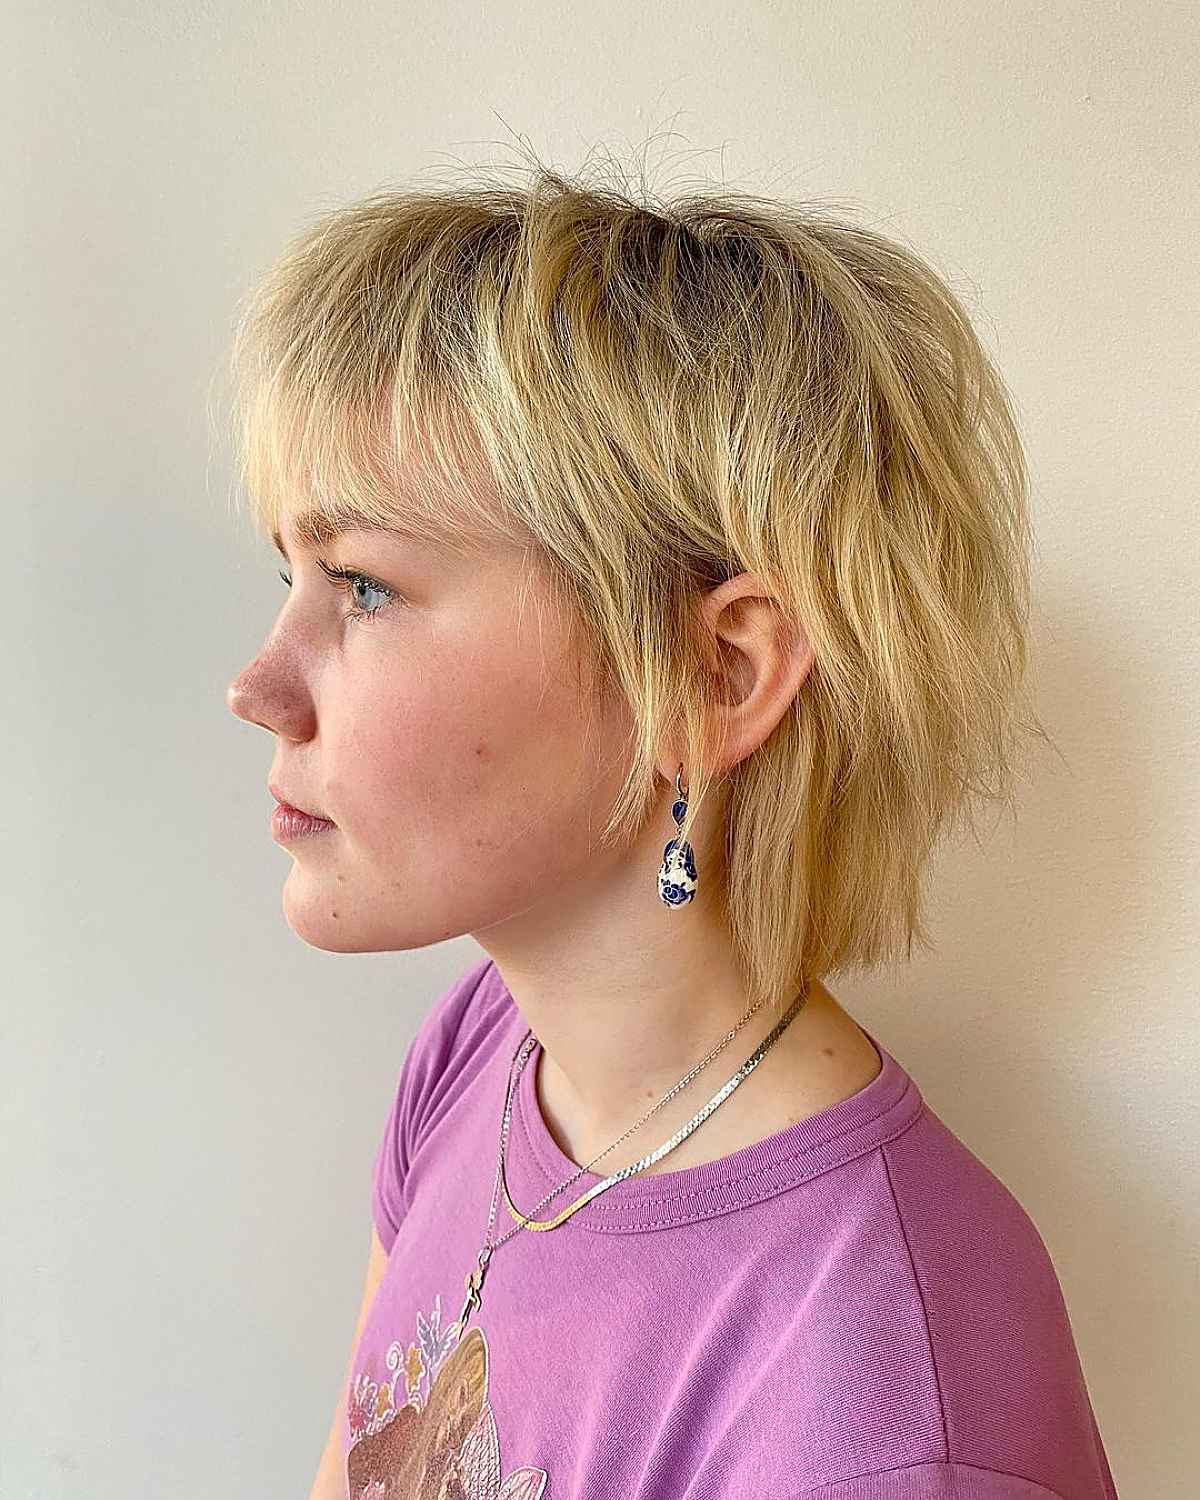 The Bixie Cut with Bangs